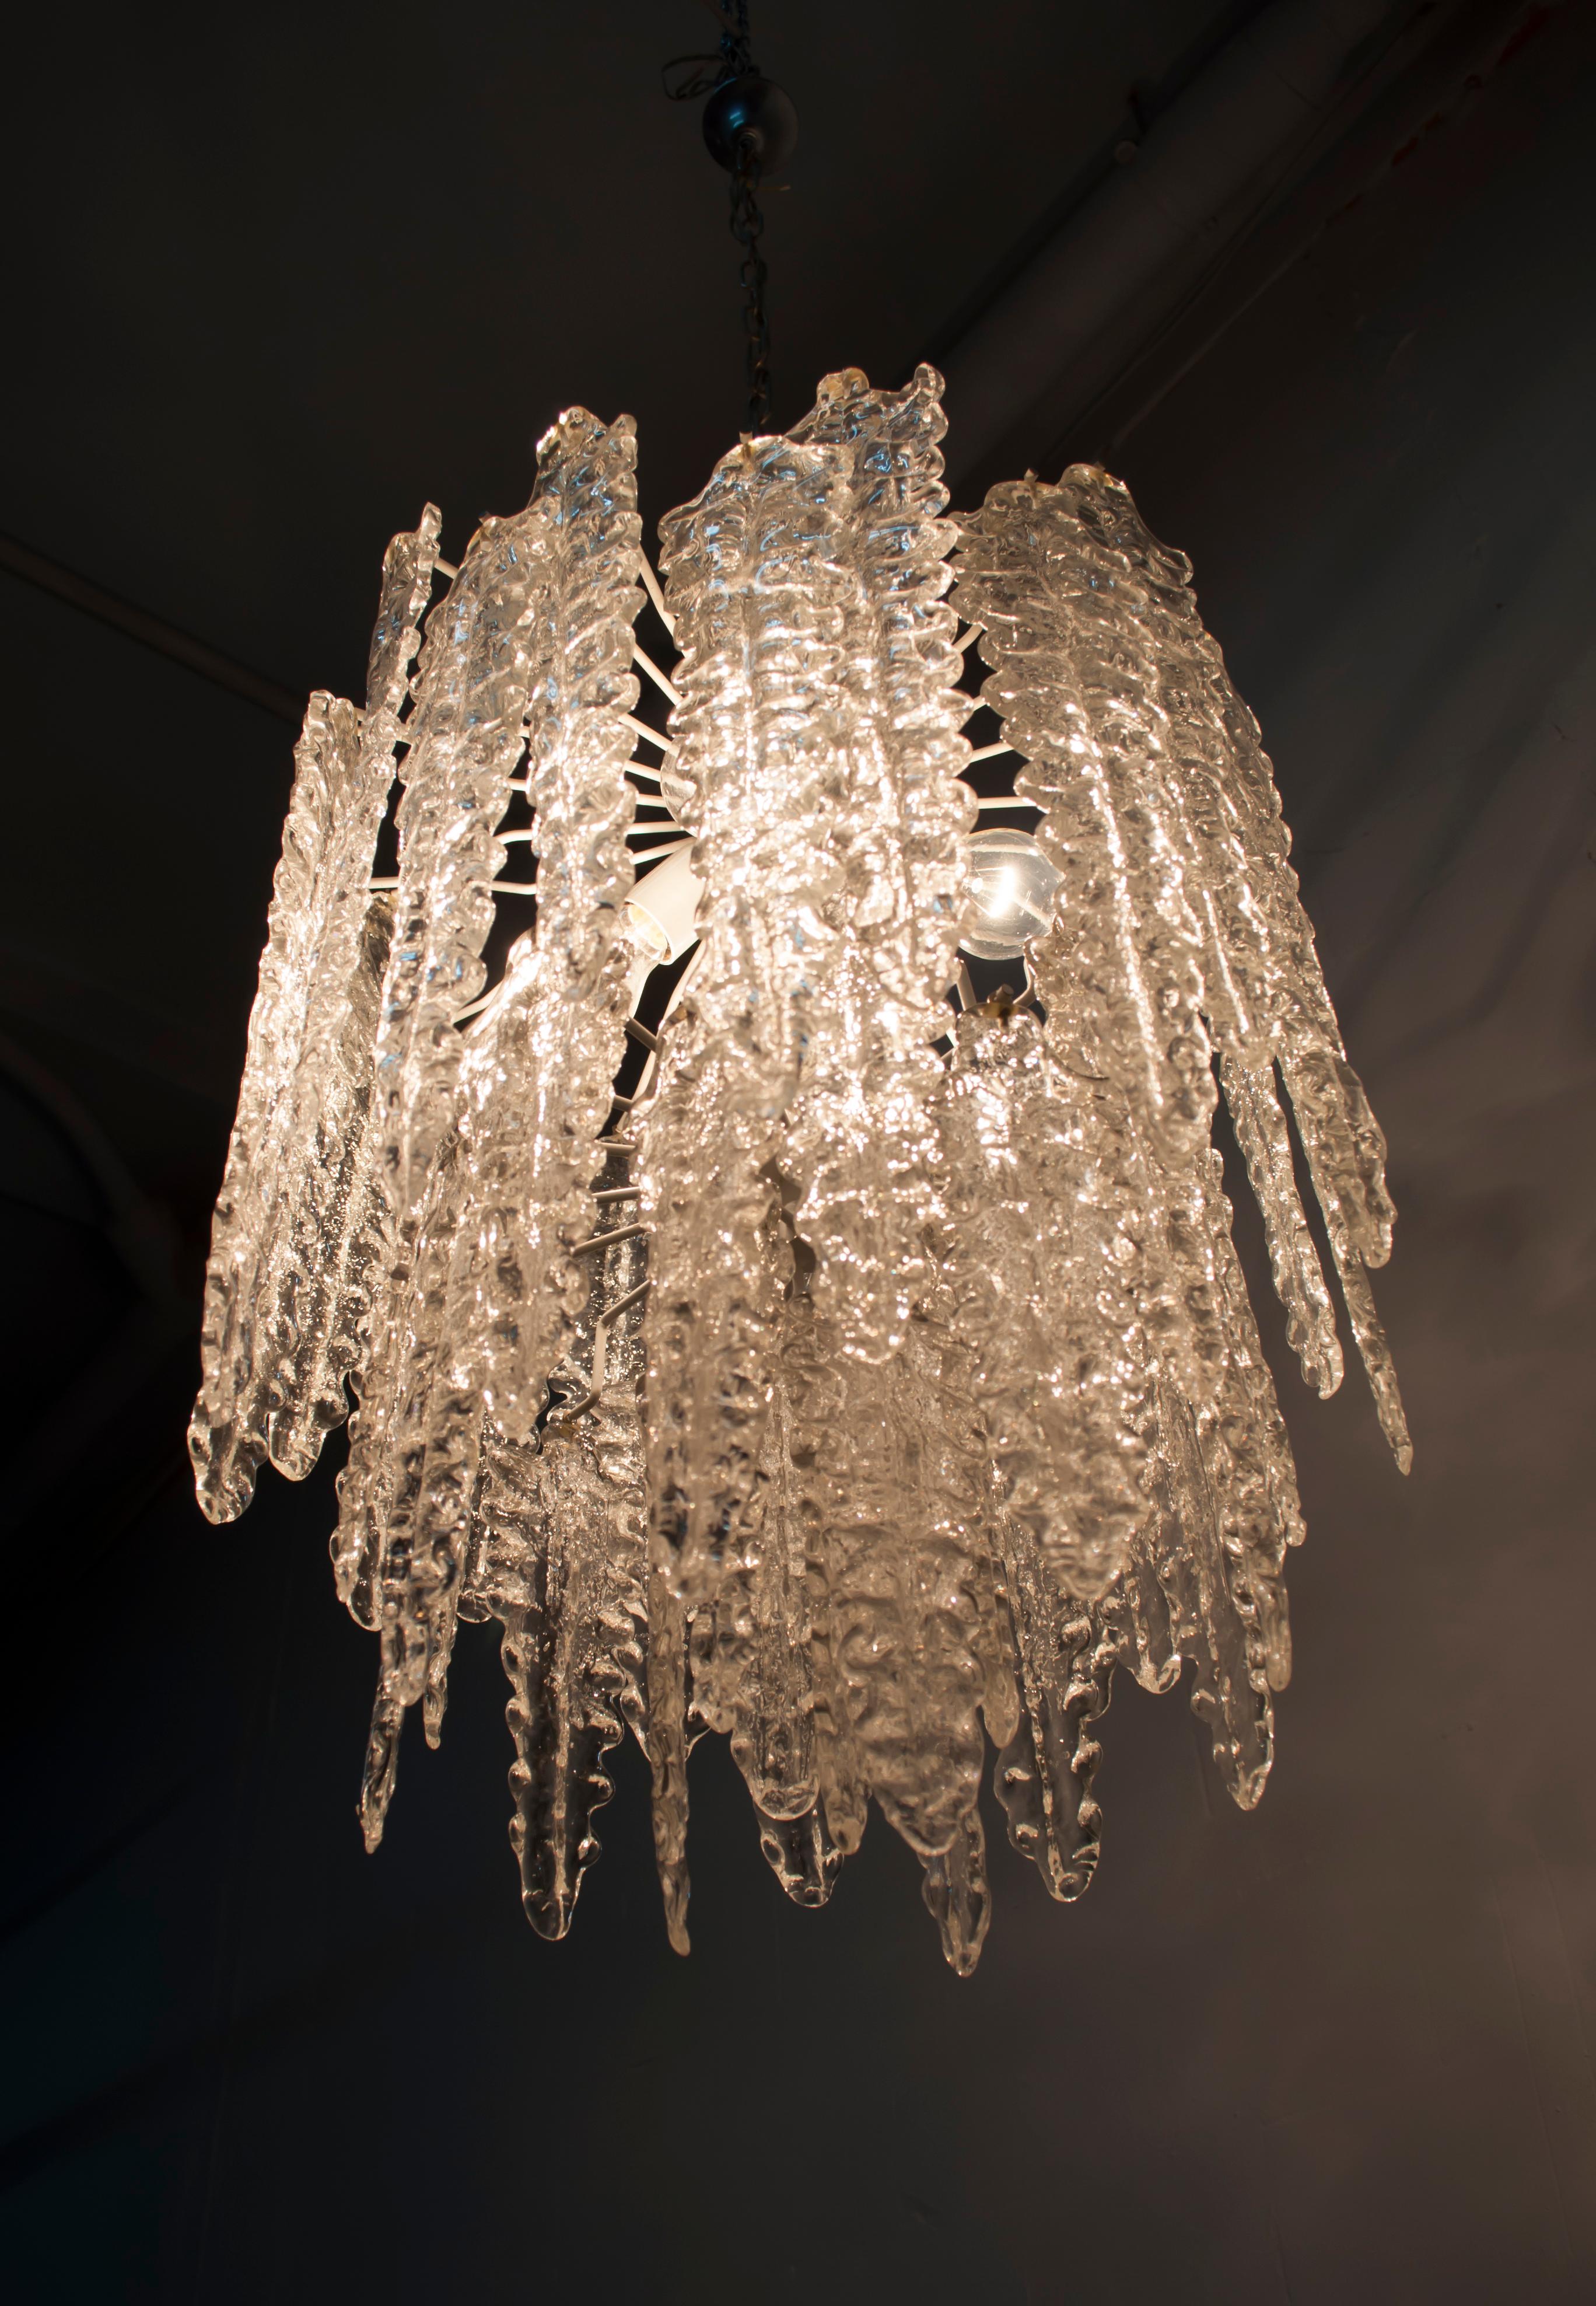 This Algae model chandelier was produced by Venini in the 1960s. The structure is in metal with elements in colorless Murano glass.

Paolo Venini (1895-1959) emerged as one of the leading figures in the production of Murano glass and an important